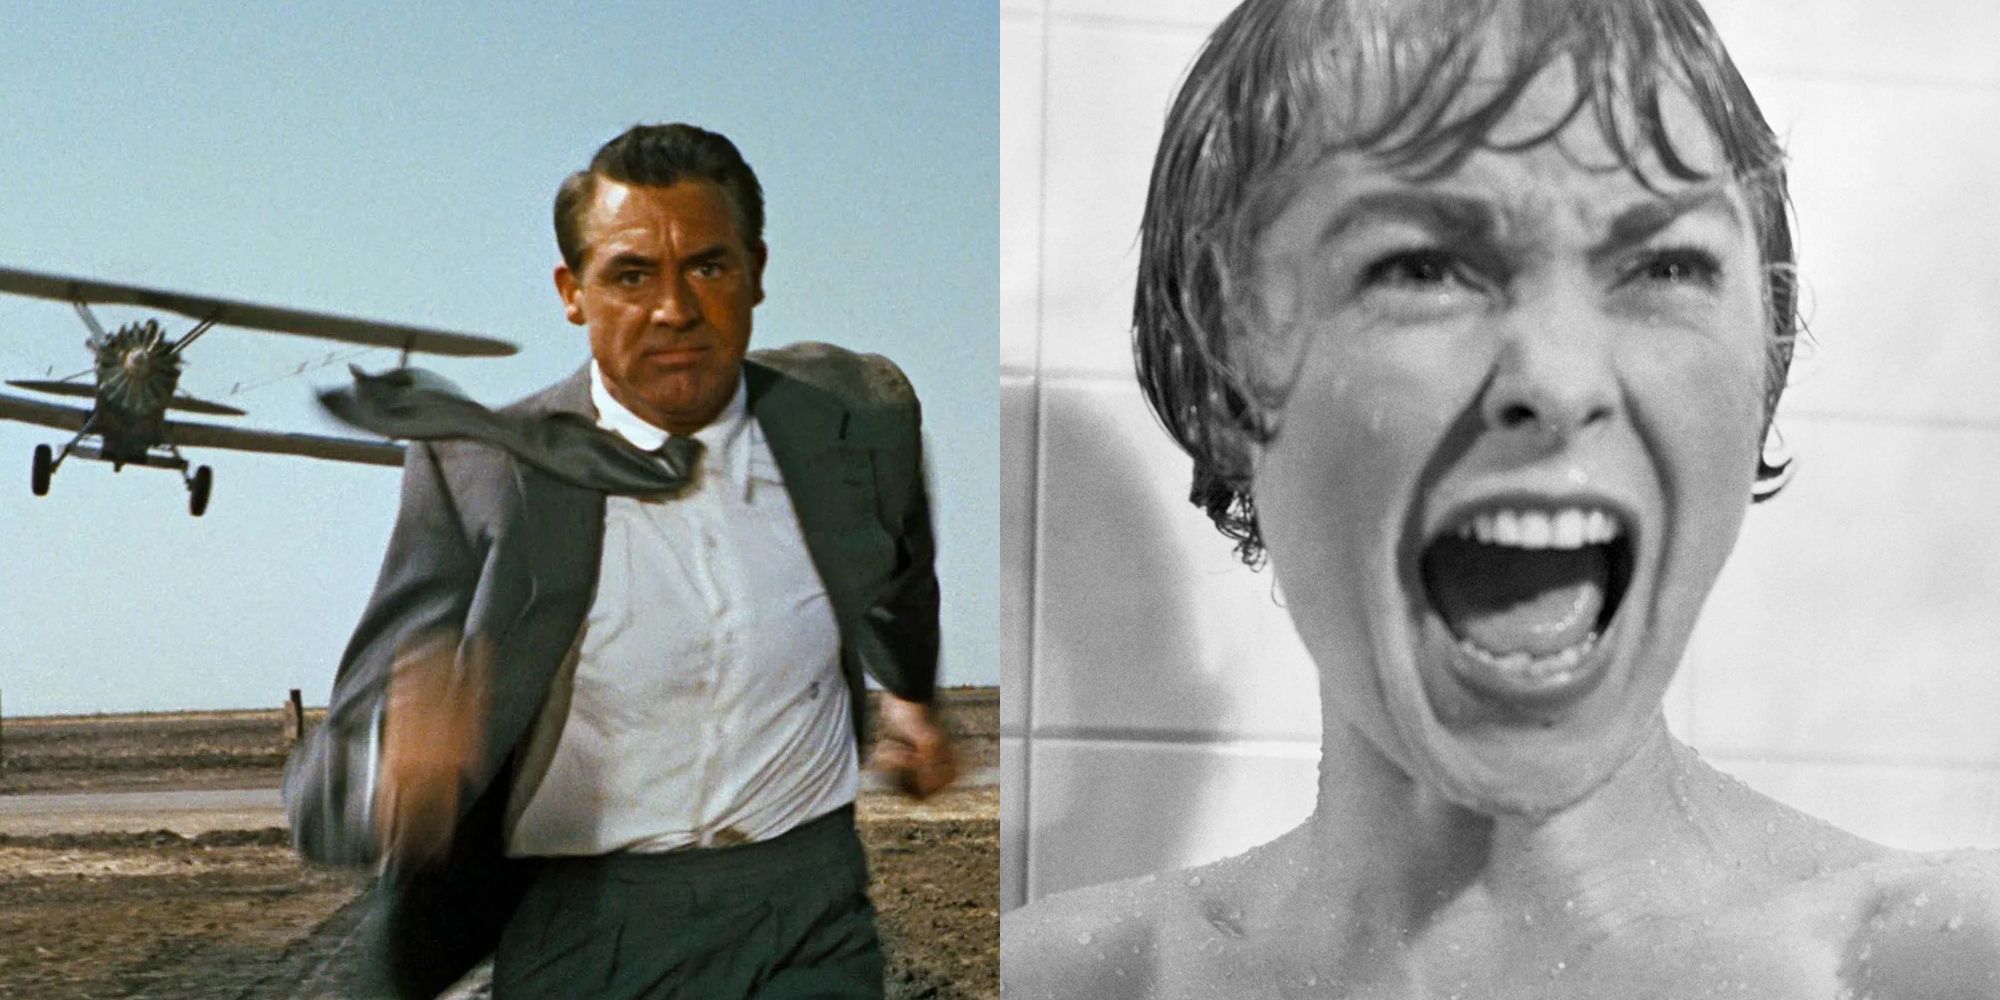 North by Northwest and Psycho